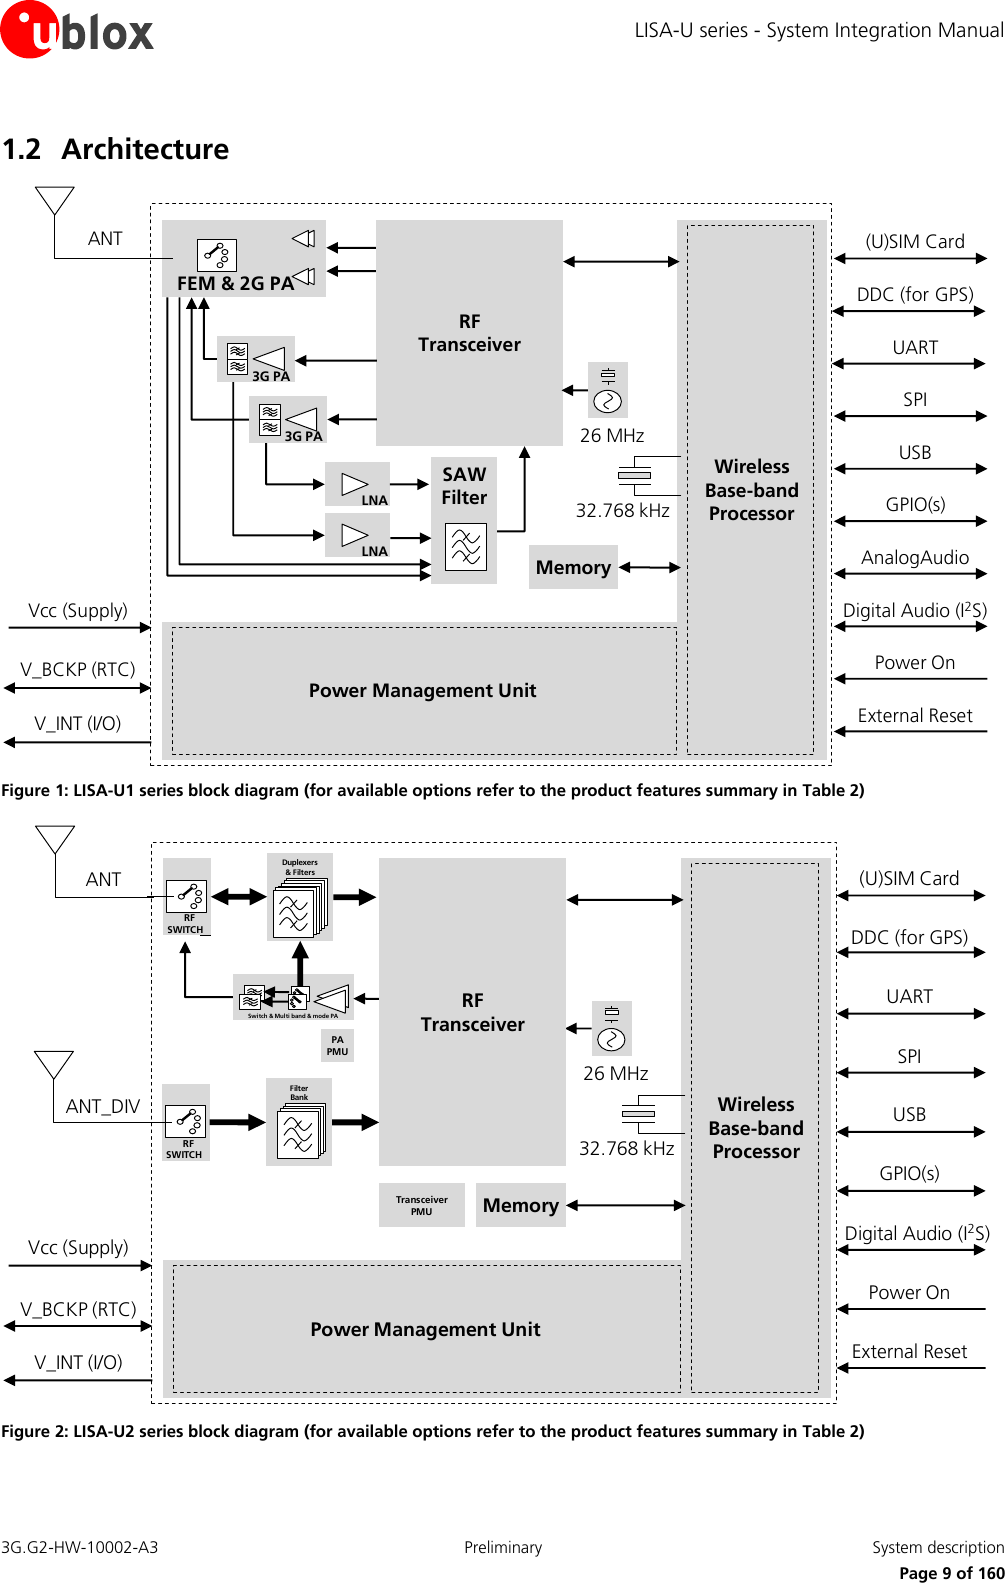 LISA-U series - System Integration Manual 3G.G2-HW-10002-A3  Preliminary  System description      Page 9 of 160 1.2 Architecture WirelessBase-bandProcessorMemoryPower Management UnitRF Transceiver26 MHz32.768 kHzSAWFilterFEM &amp; 2G PAANTLNA3G PALNA3G PADDC (for GPS)(U)SIM CardUARTSPIUSBGPIO(s)Power OnExternal ResetV_BCKP (RTC)Vcc (Supply)V_INT (I/O)Digital Audio (I2S)AnalogAudio Figure 1: LISA-U1 series block diagram (for available options refer to the product features summary in Table 2) WirelessBase-bandProcessorMemoryPower Management Unit26 MHz32.768 kHzANTSwitch &amp; Multi band &amp; mode PADDC (for GPS)(U)SIM CardUARTSPIUSBGPIO(s)Power OnExternal ResetV_BCKP (RTC)Vcc (Supply)V_INT (I/O)Digital Audio (I2S)RFSWITCHRF TransceiverDuplexers&amp; FiltersANT_DIVRFSWITCHFilterBankPA PMUTransceiver PMU Figure 2: LISA-U2 series block diagram (for available options refer to the product features summary in Table 2)  